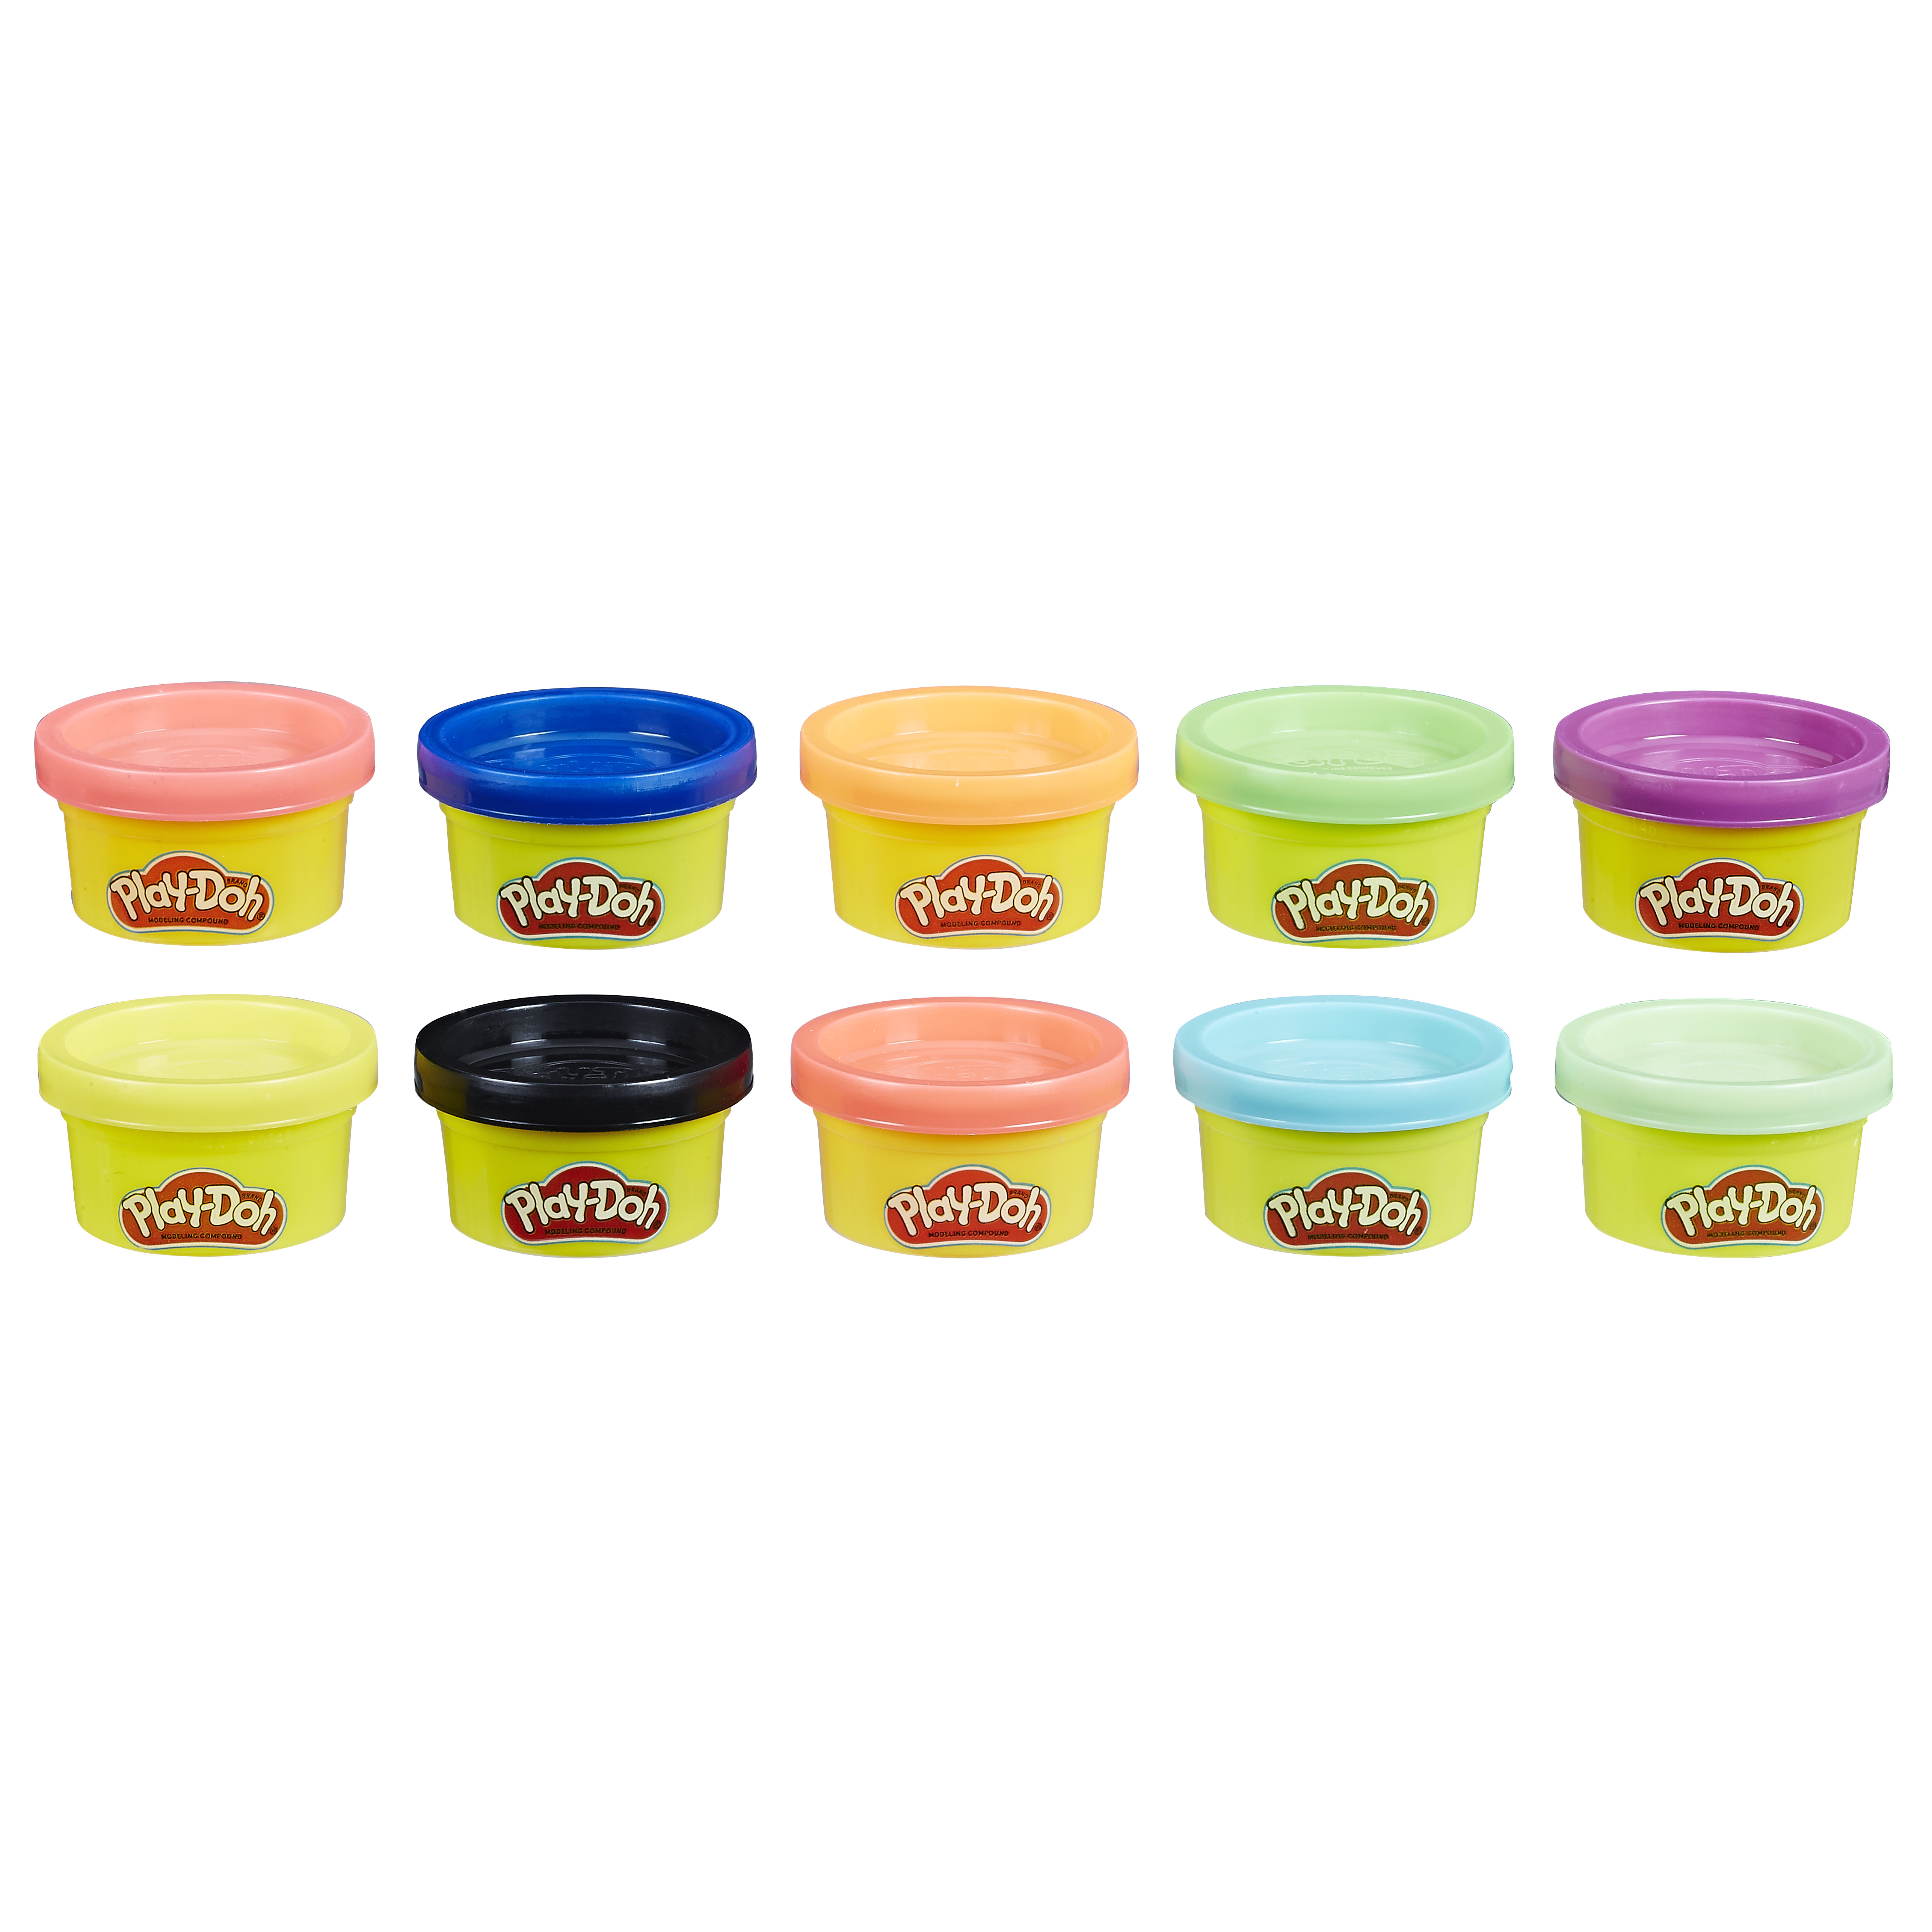 PLAY-DOH Play-Doh Party Turm Spielset, Mehrfarbig